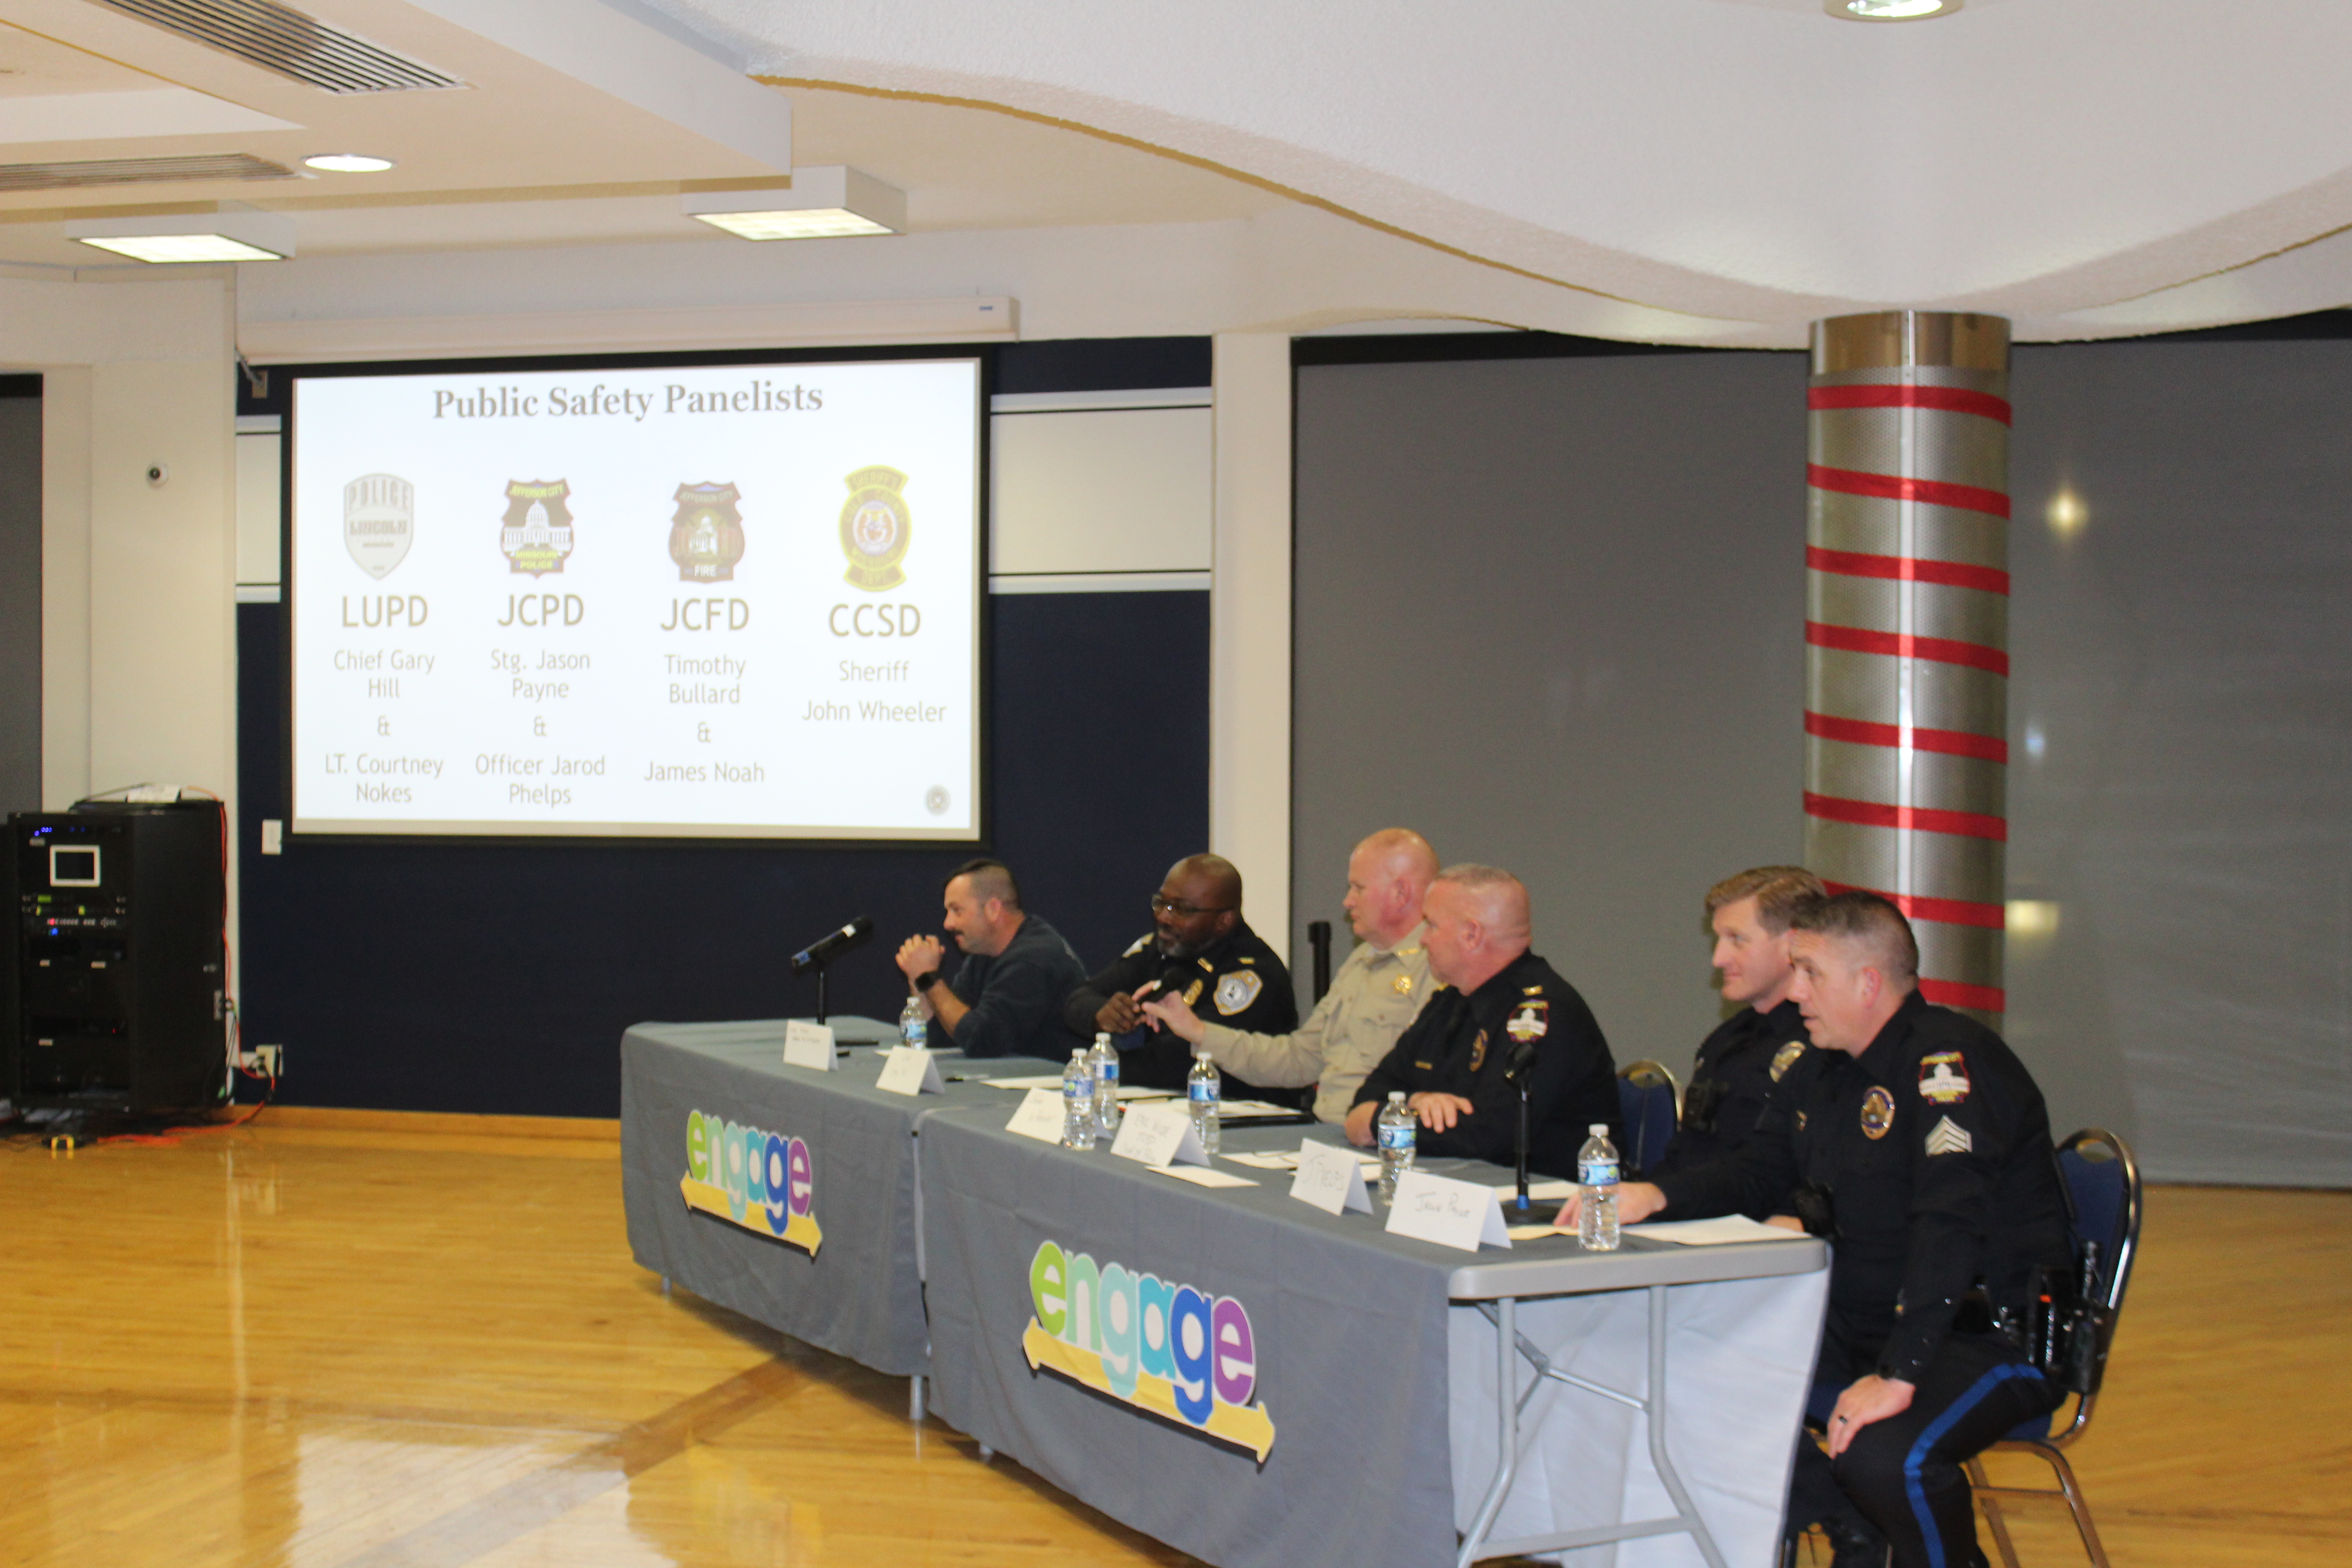 Public safety officials from Jefferson City and Cole County engage in a panel discussion at Lincoln University, emphasizing collaborative relationships and addressing student concerns on mental health, diversity, and community safety.